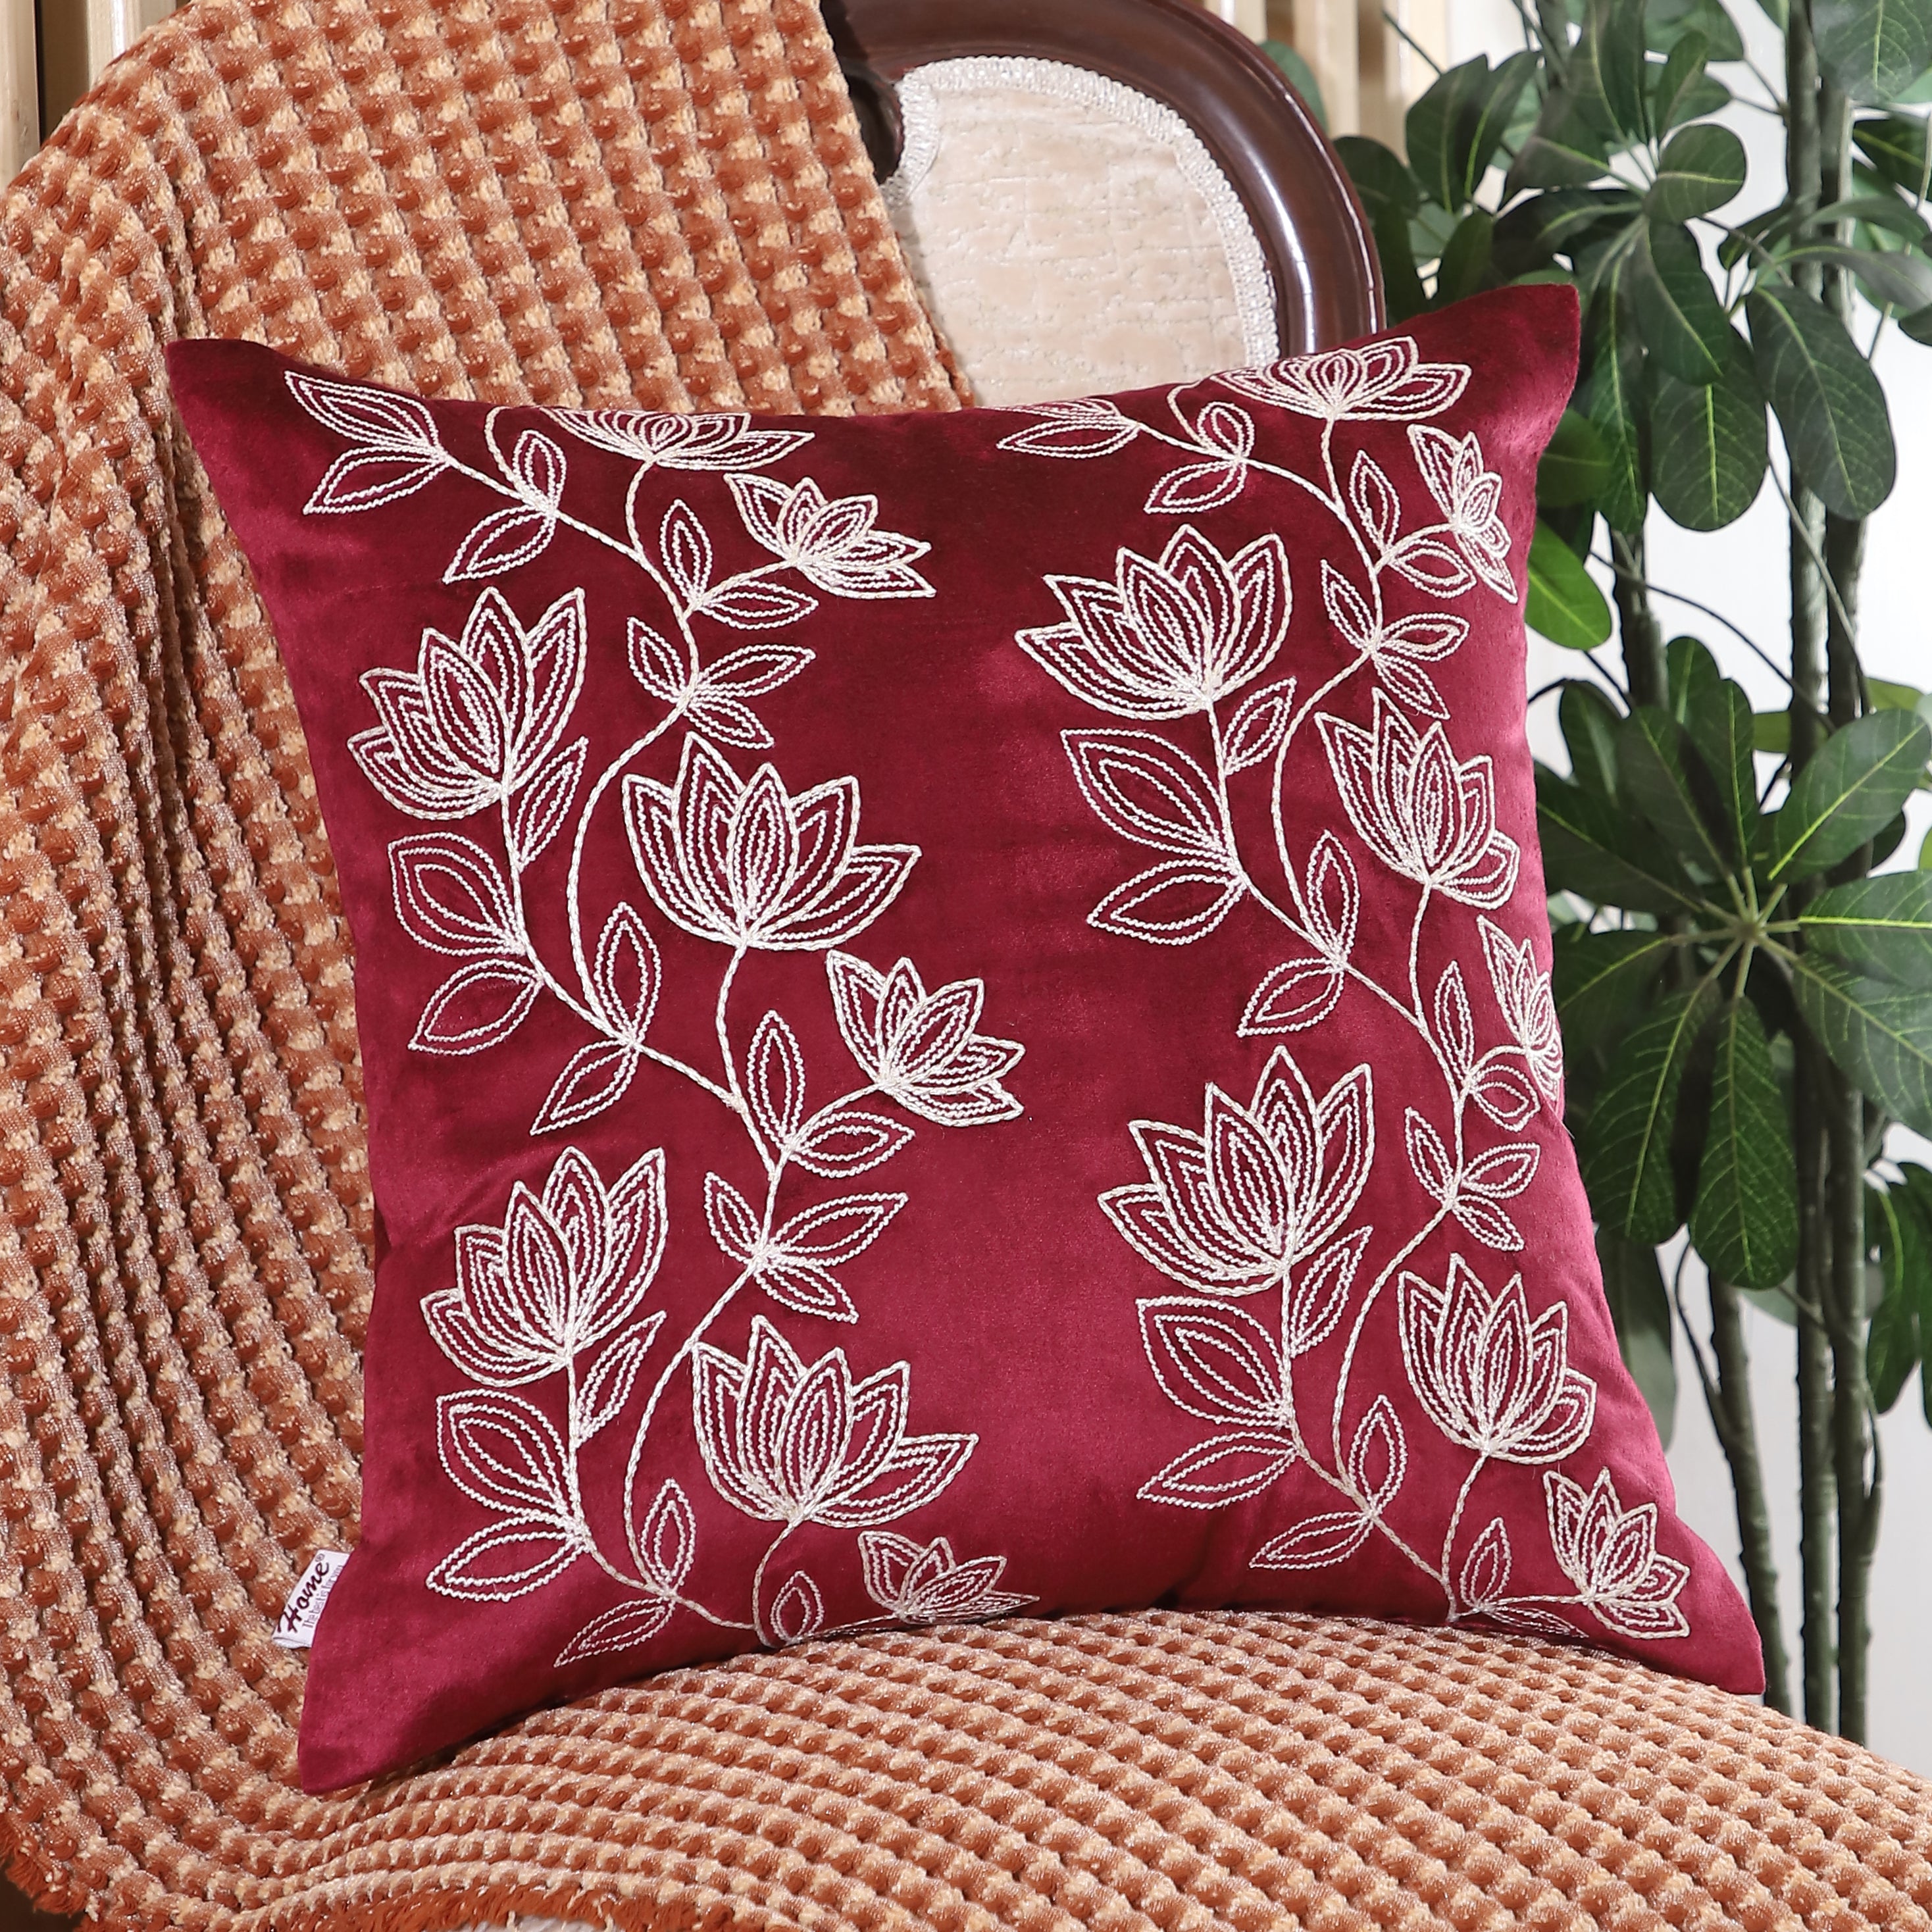 Petal Bliss Embroidered Elegance 18x18 Inch Cushion Cover